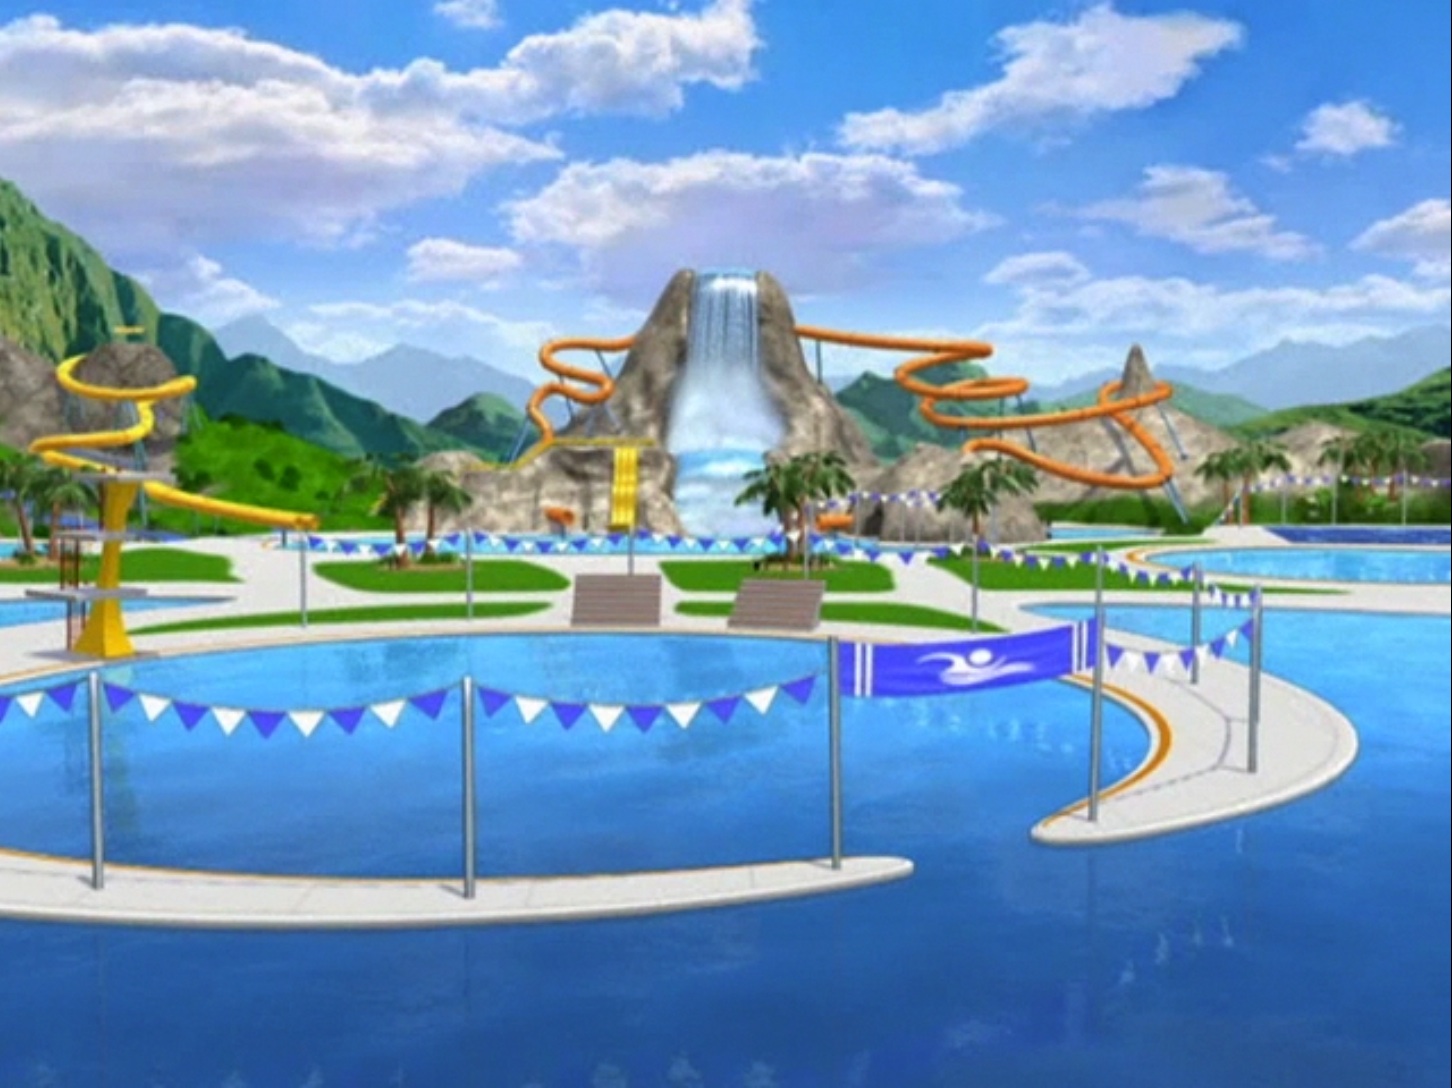 name waterpark type waterpark location unknown first appearance the